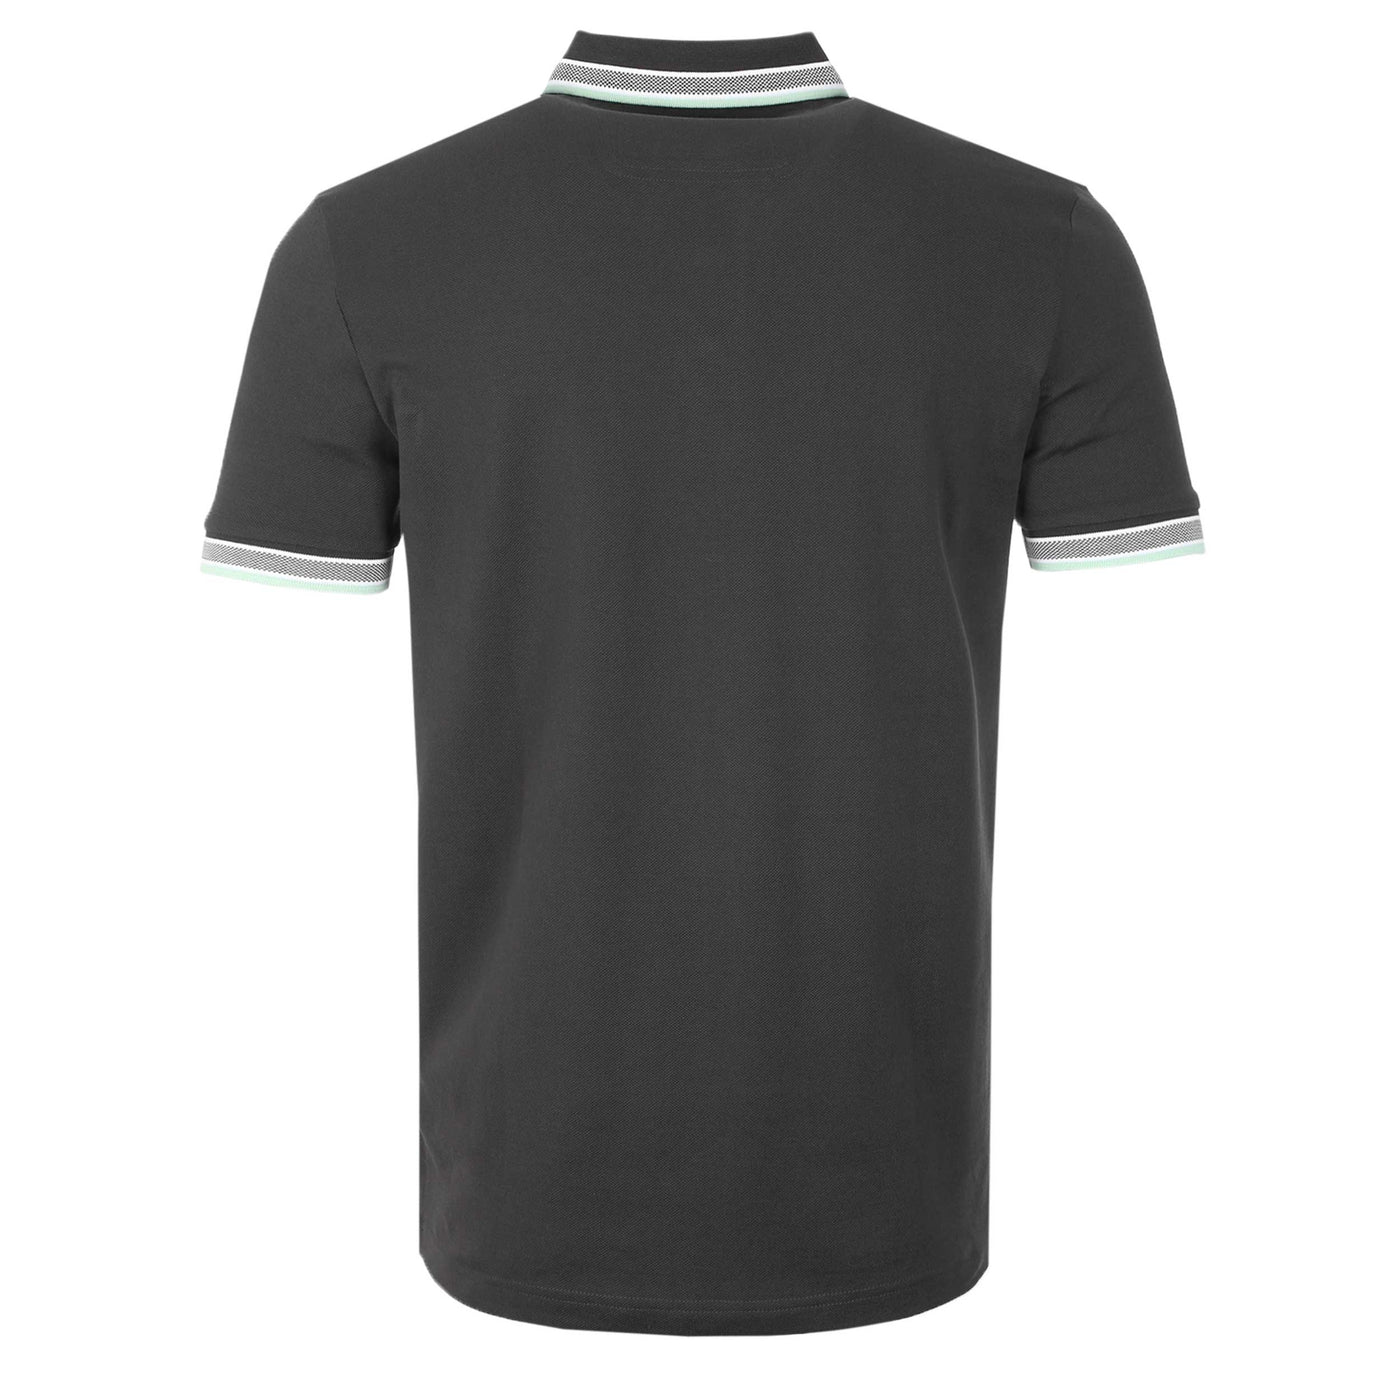 BOSS Paddy Polo Shirt in Charcoal & Mint Back